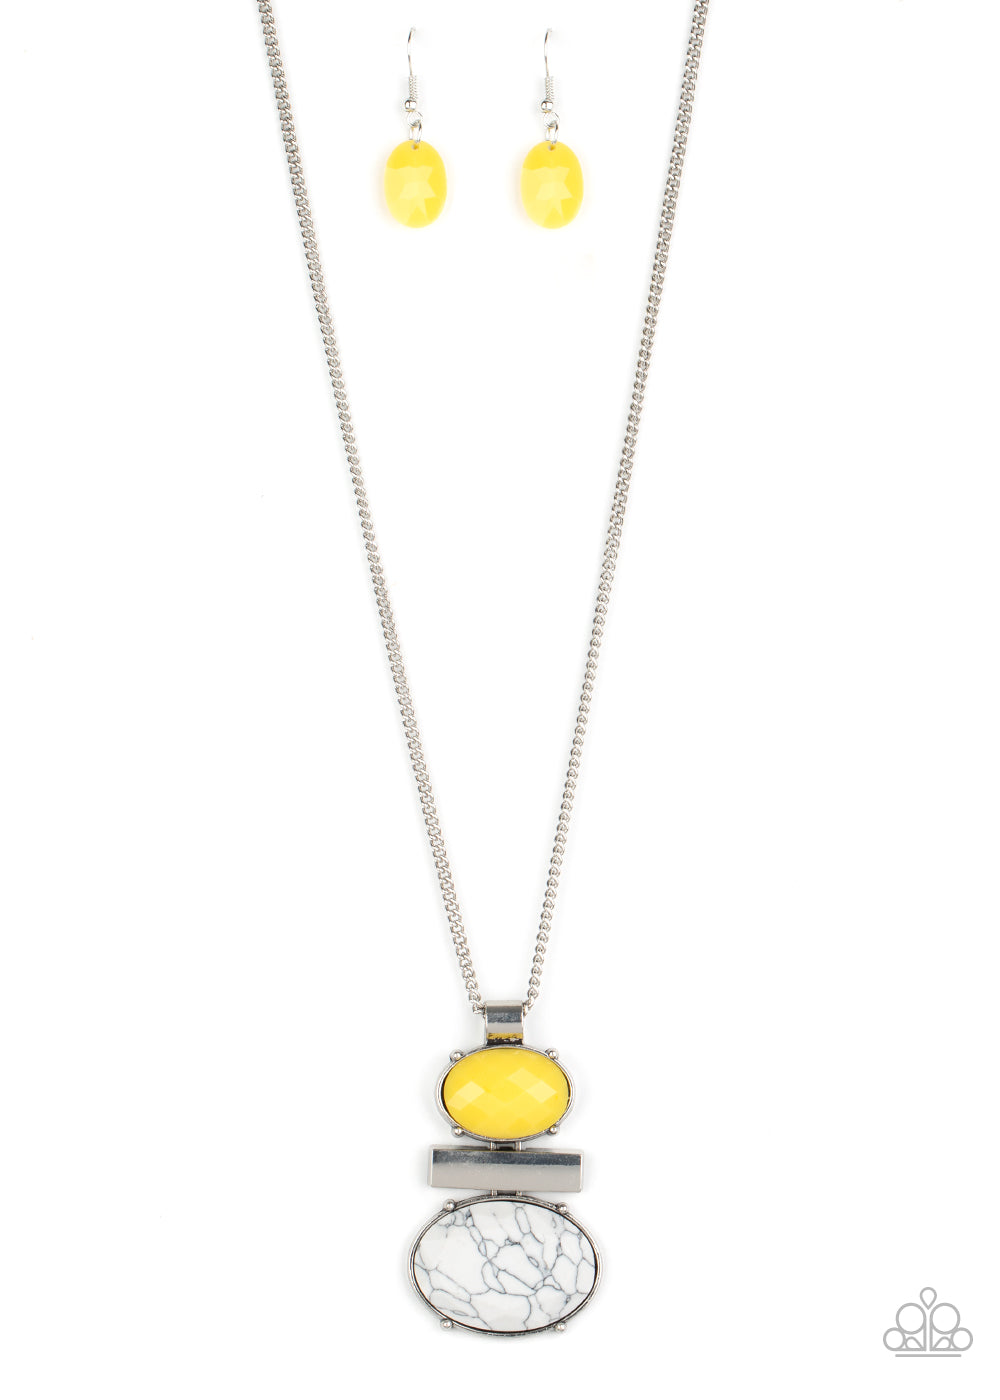 Paparazzi Accessories Finding Balance - Yellow Necklaces - Lady T Accessories